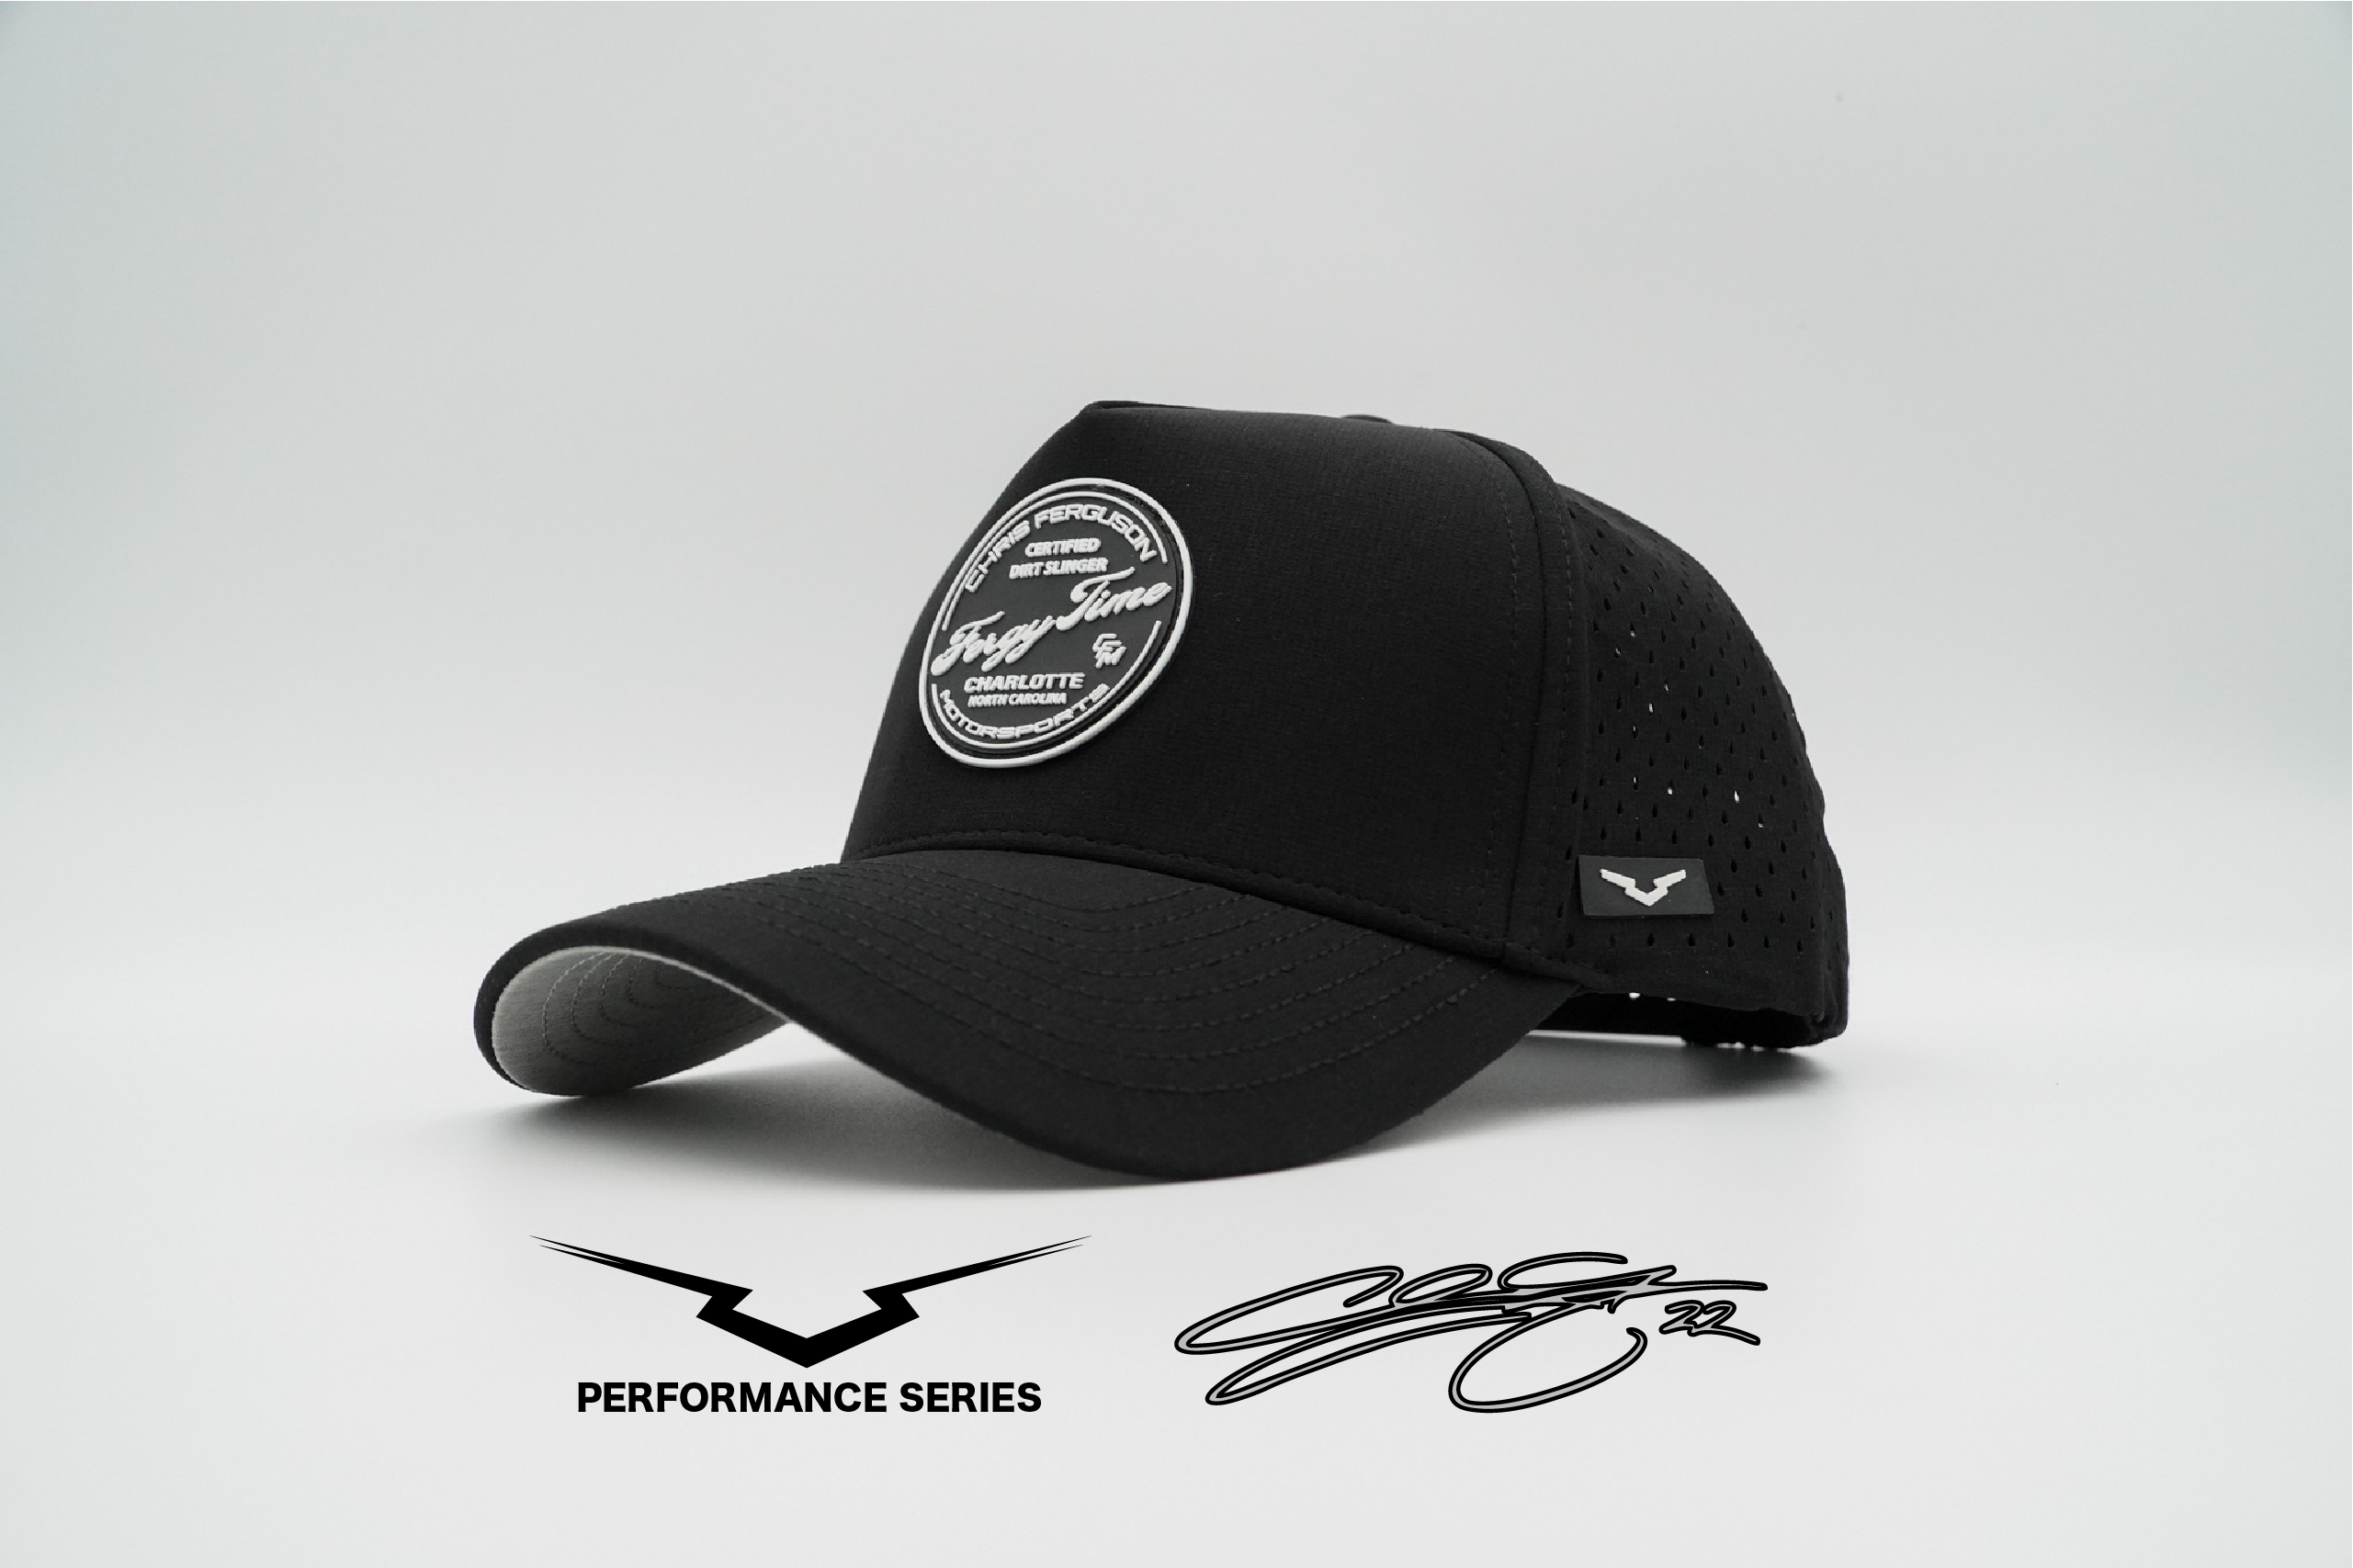 Fergy Time Circle Patch x Sweet Victory Performance Series Snap Back Black